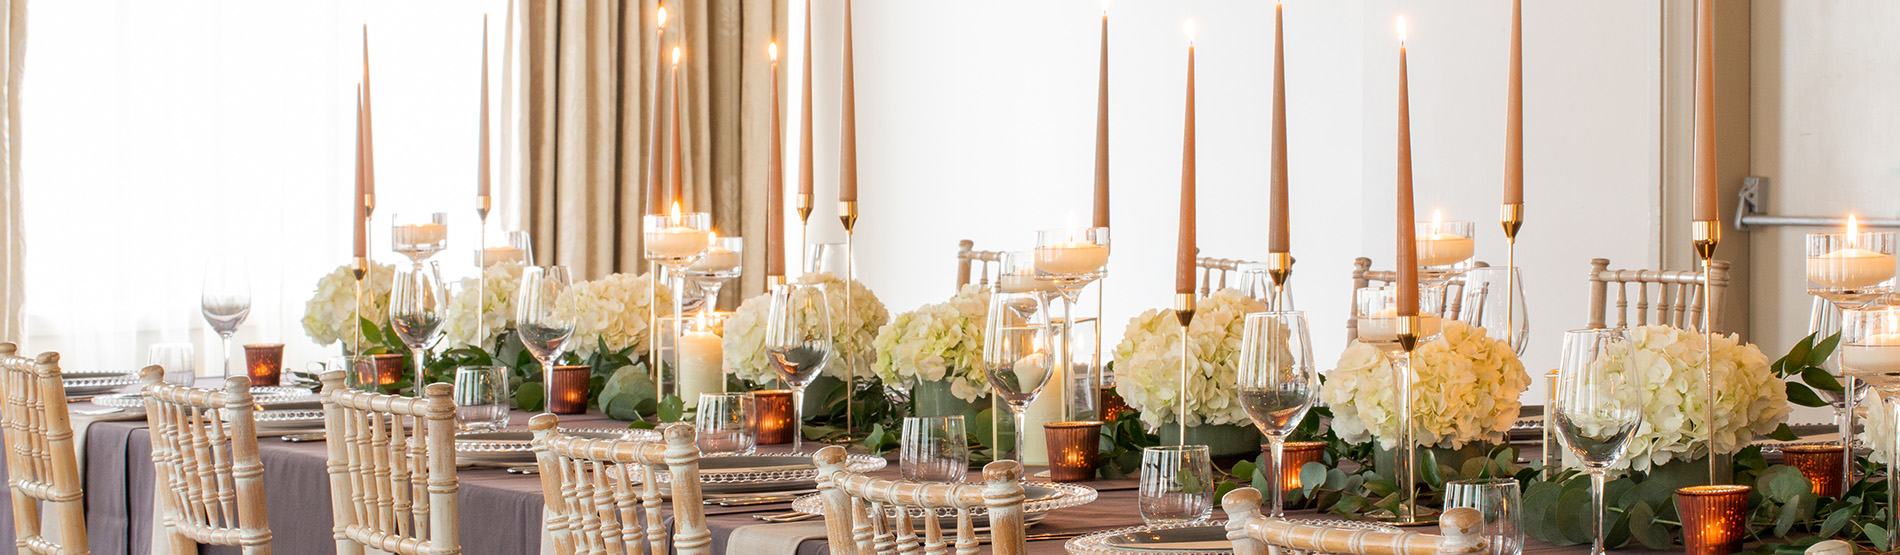 Long table decorated with long candles and flowers